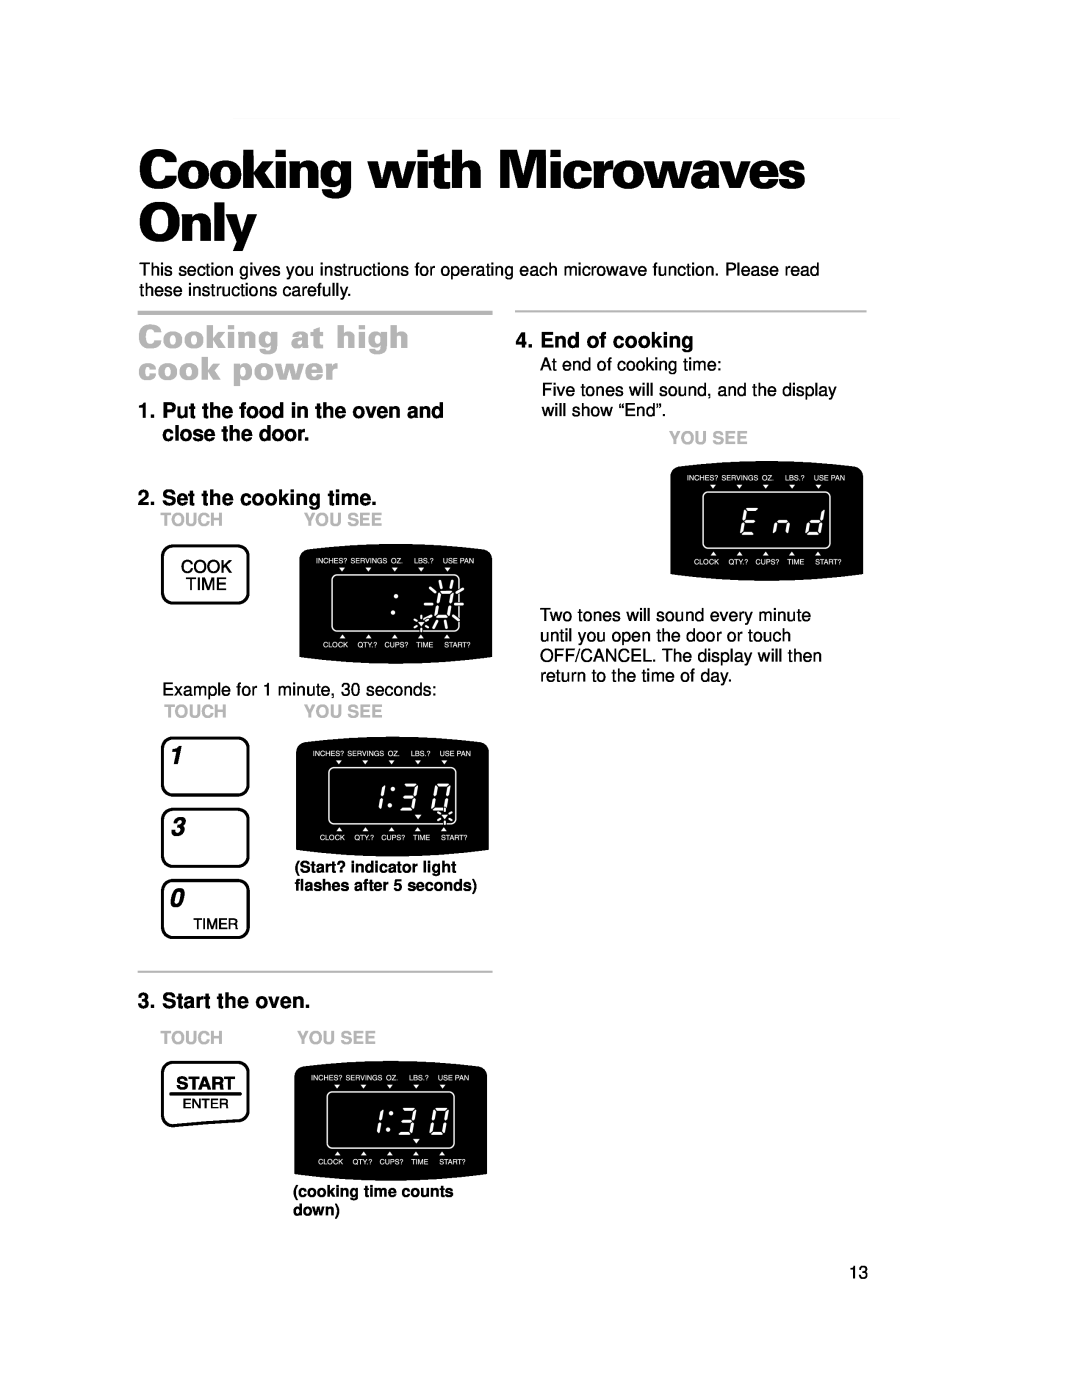 Whirlpool CMT102SG Cooking with Microwaves Only, Cooking at high cook power, Put the food in the oven and close the door 